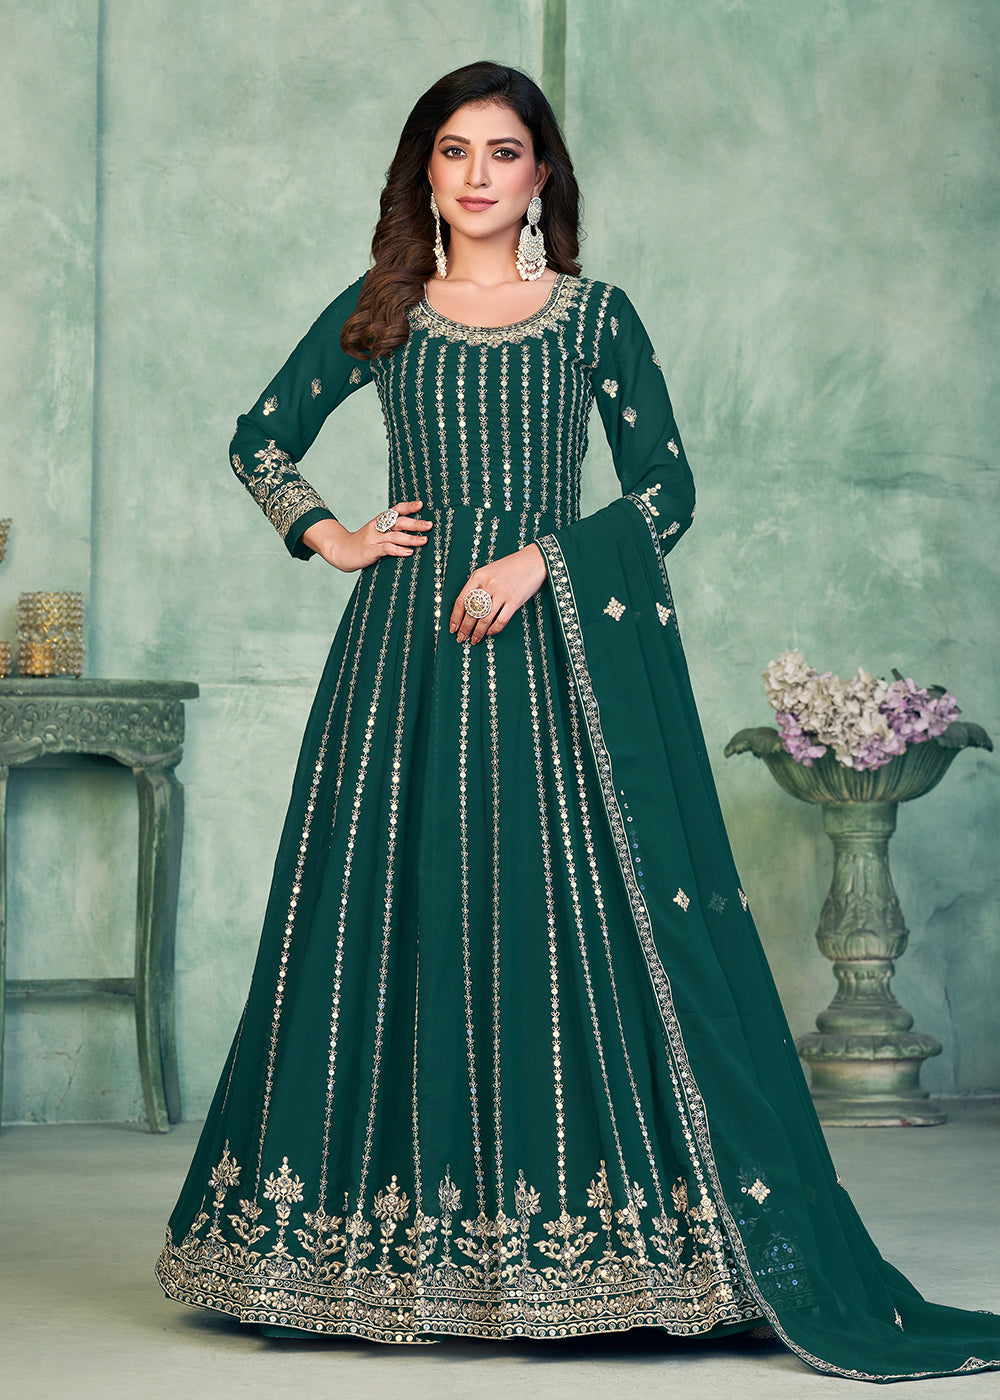 Buy Now Georgette Fabric Green Embroidered Wedding Party Anarkali Suit Online in USA, UK, Australia, New Zealand, Canada & Worldwide at Empress Clothing. 